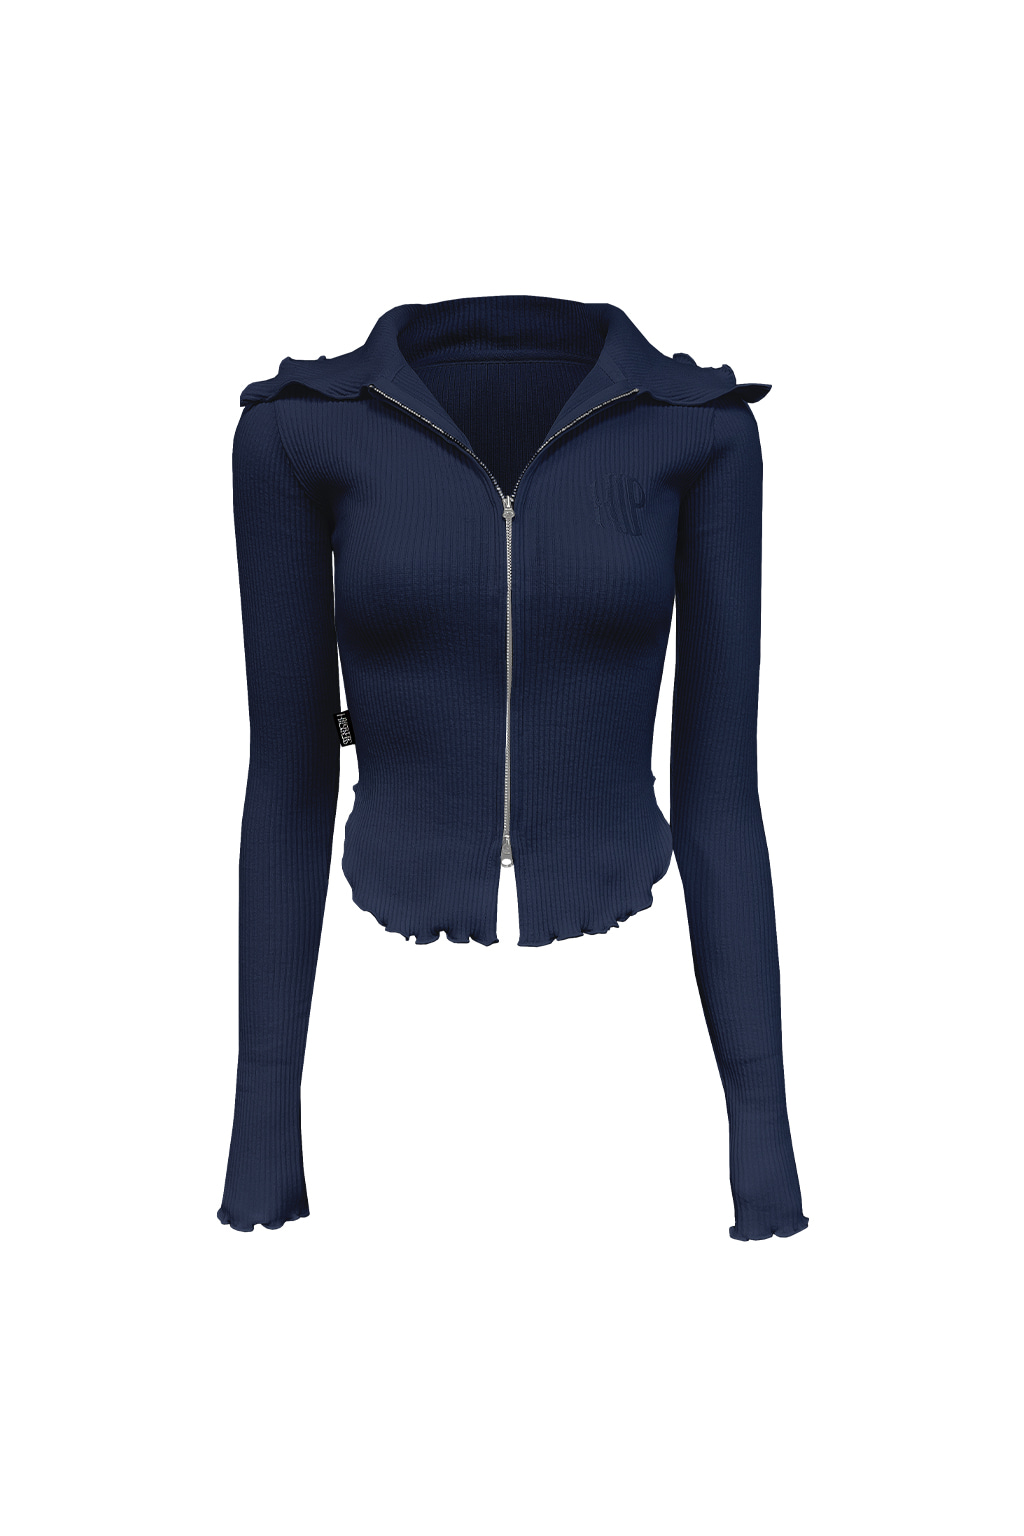 Ribbed Tension Two Way Glamour Zip-Up Navy